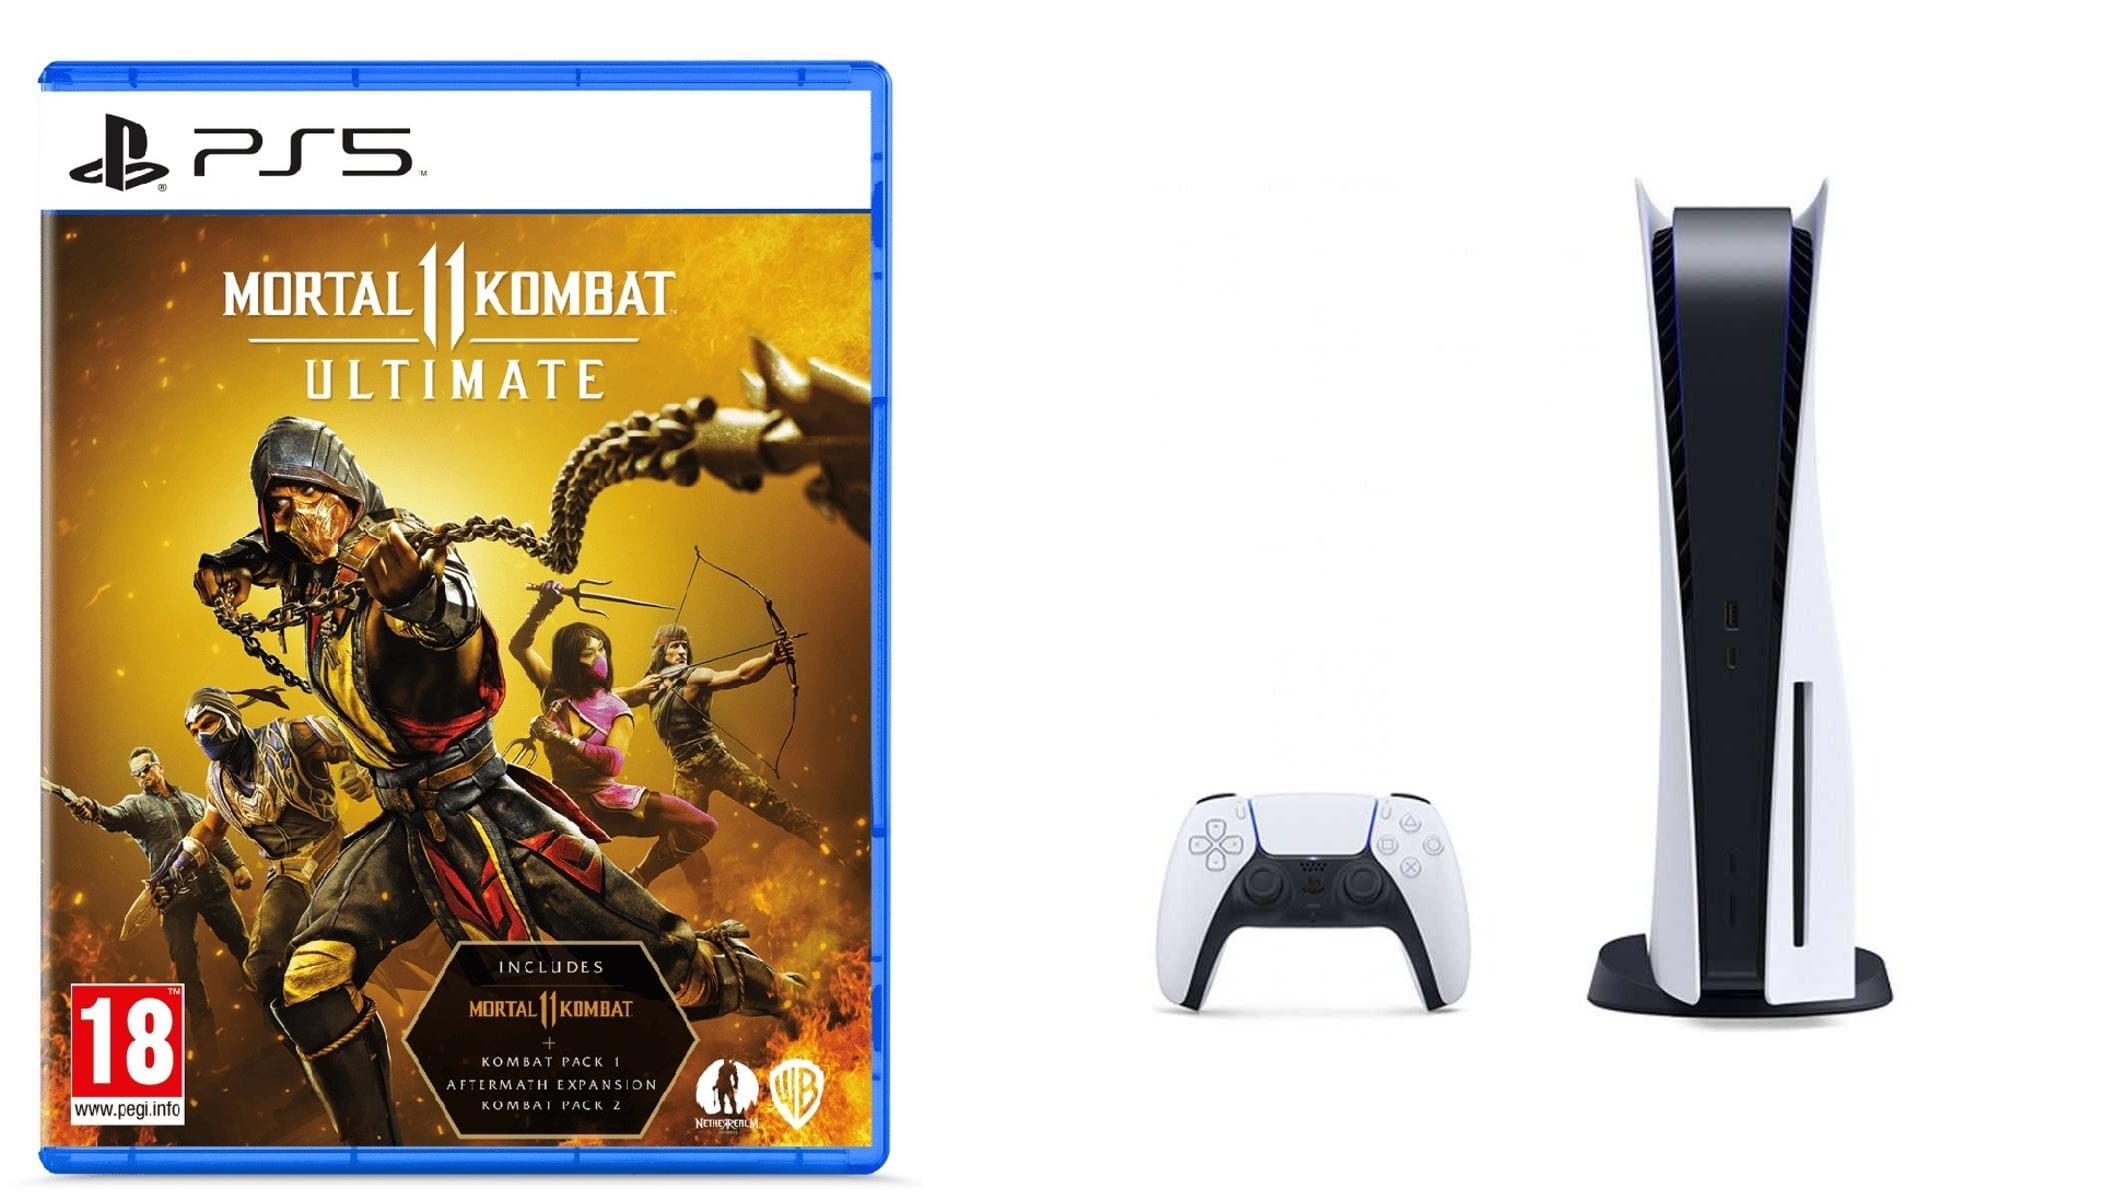 Sony PlayStation 5, 1 Wireless Controller, White - CFI-1016A01 MEE, with Mortal Kombat 11 Ultimate Edition for PlayStation 5